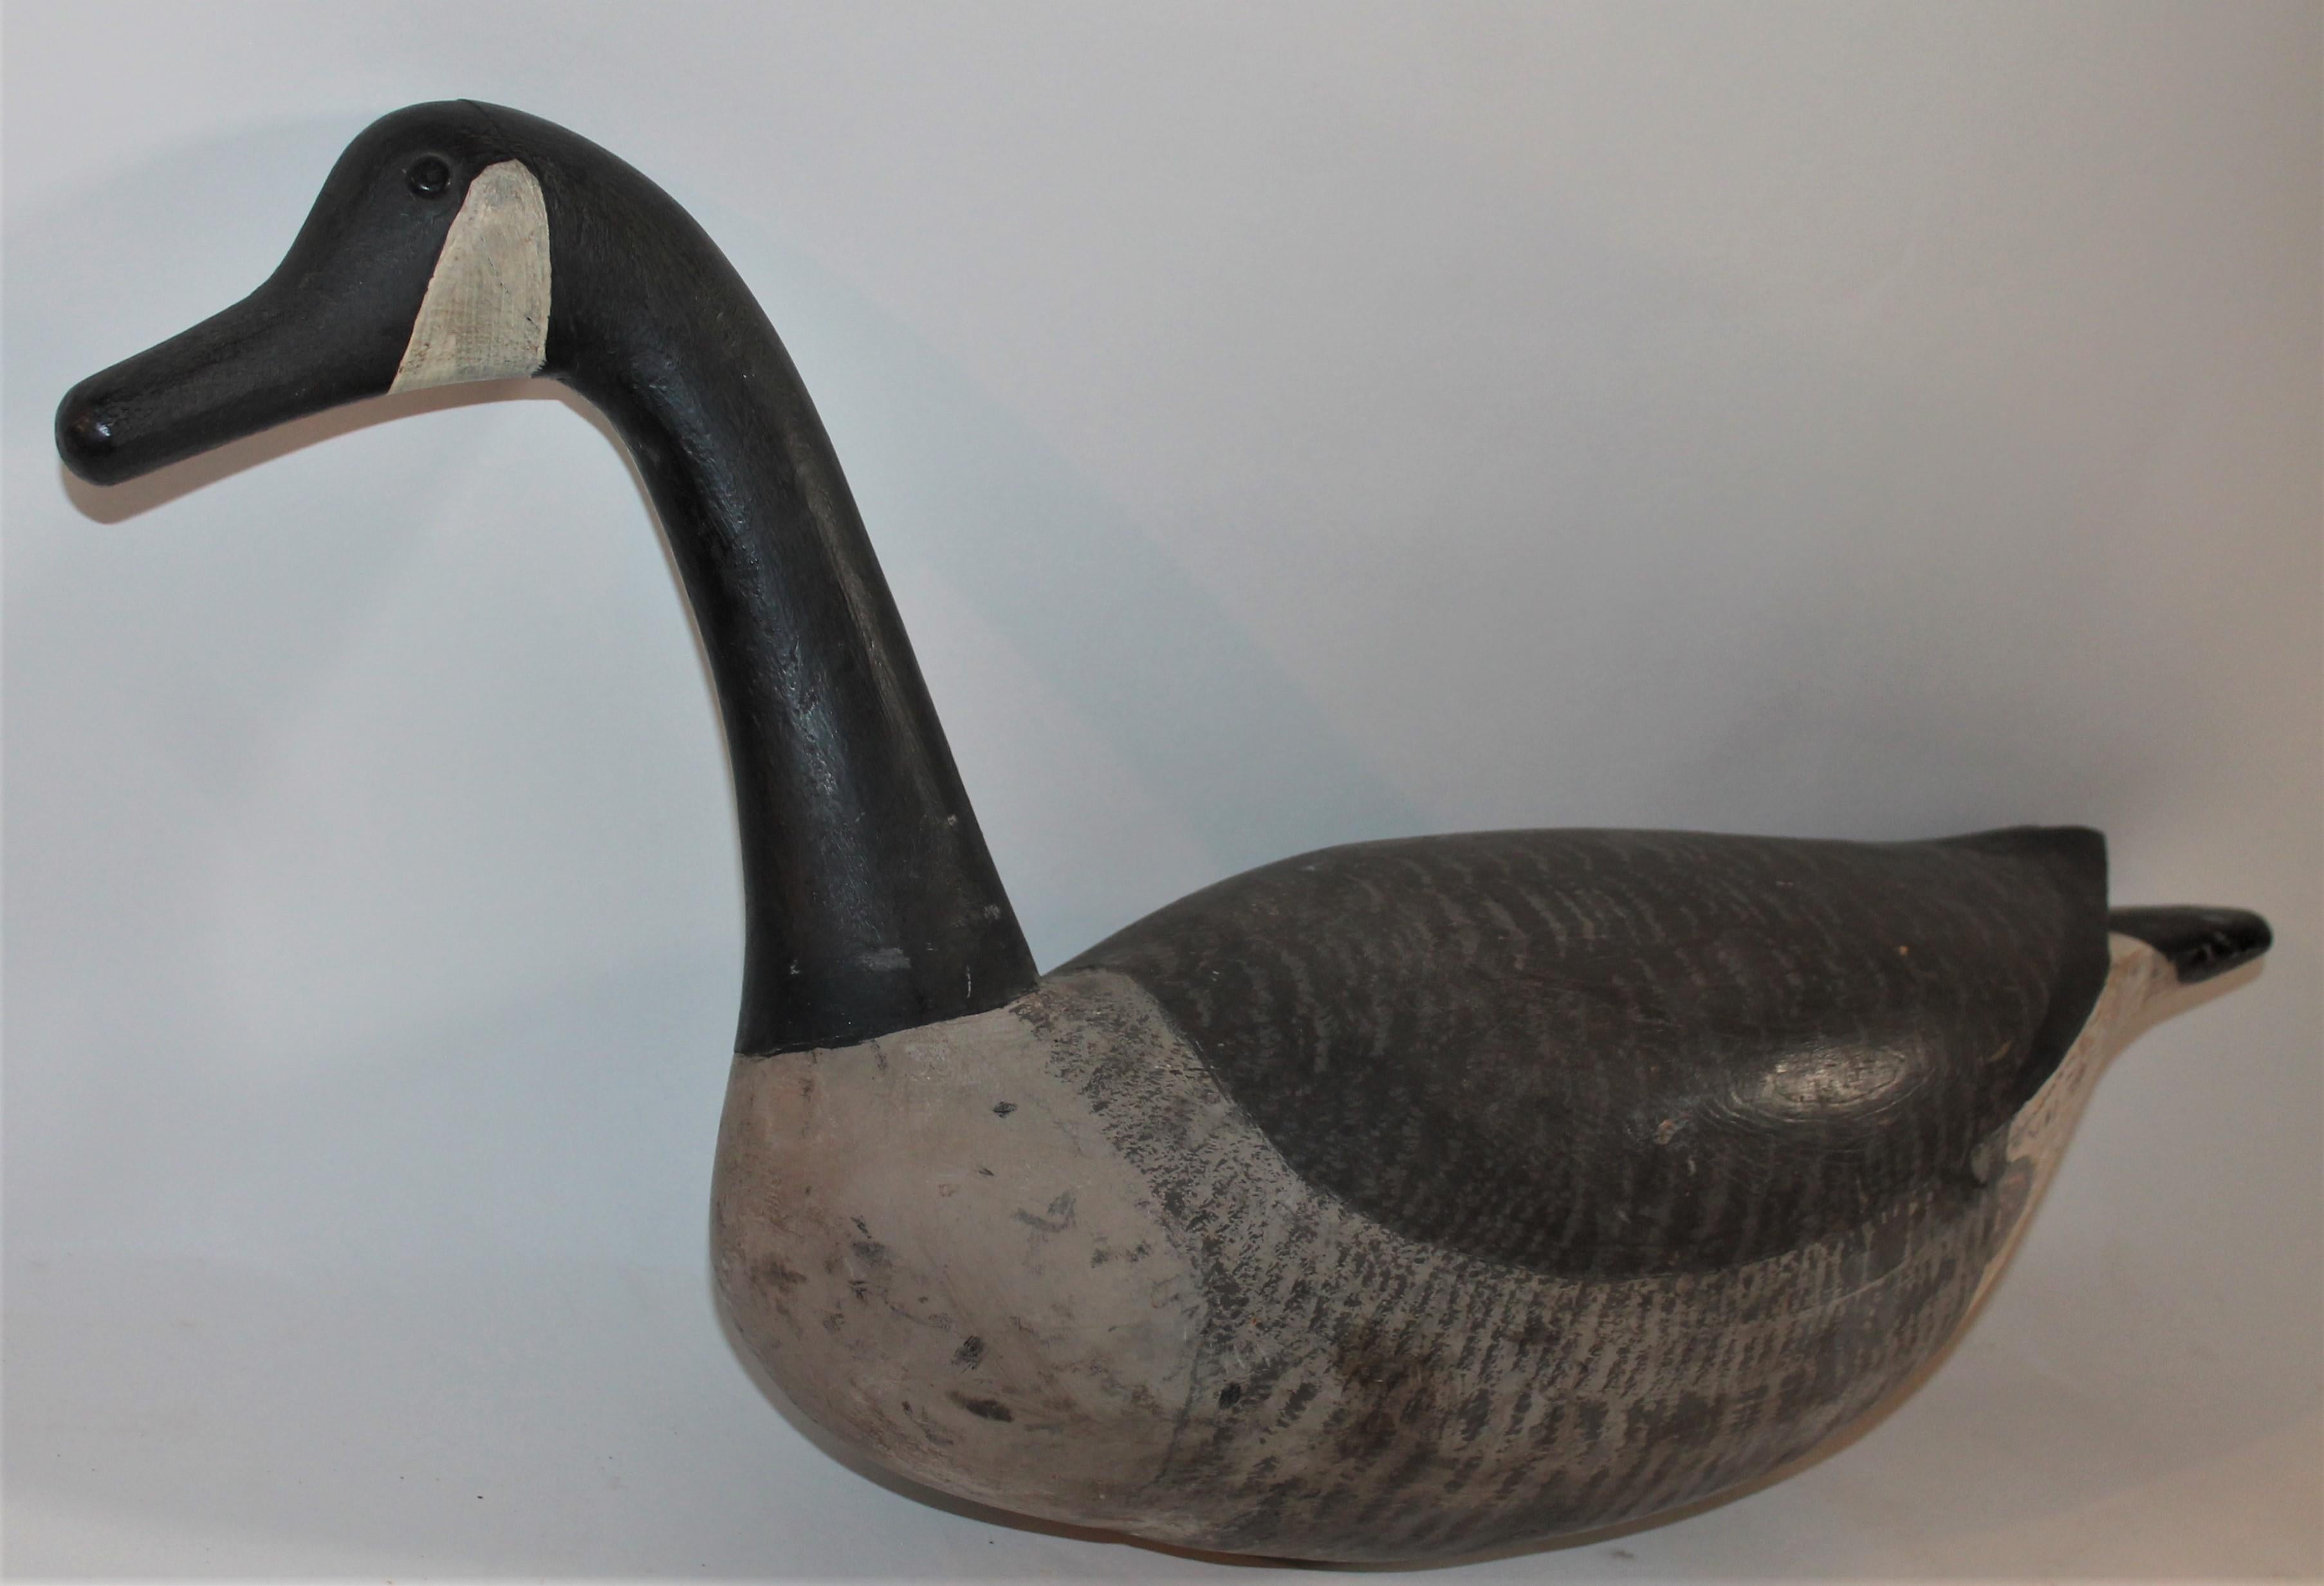 This decoy has great age and wear. The paint is original to this piece.